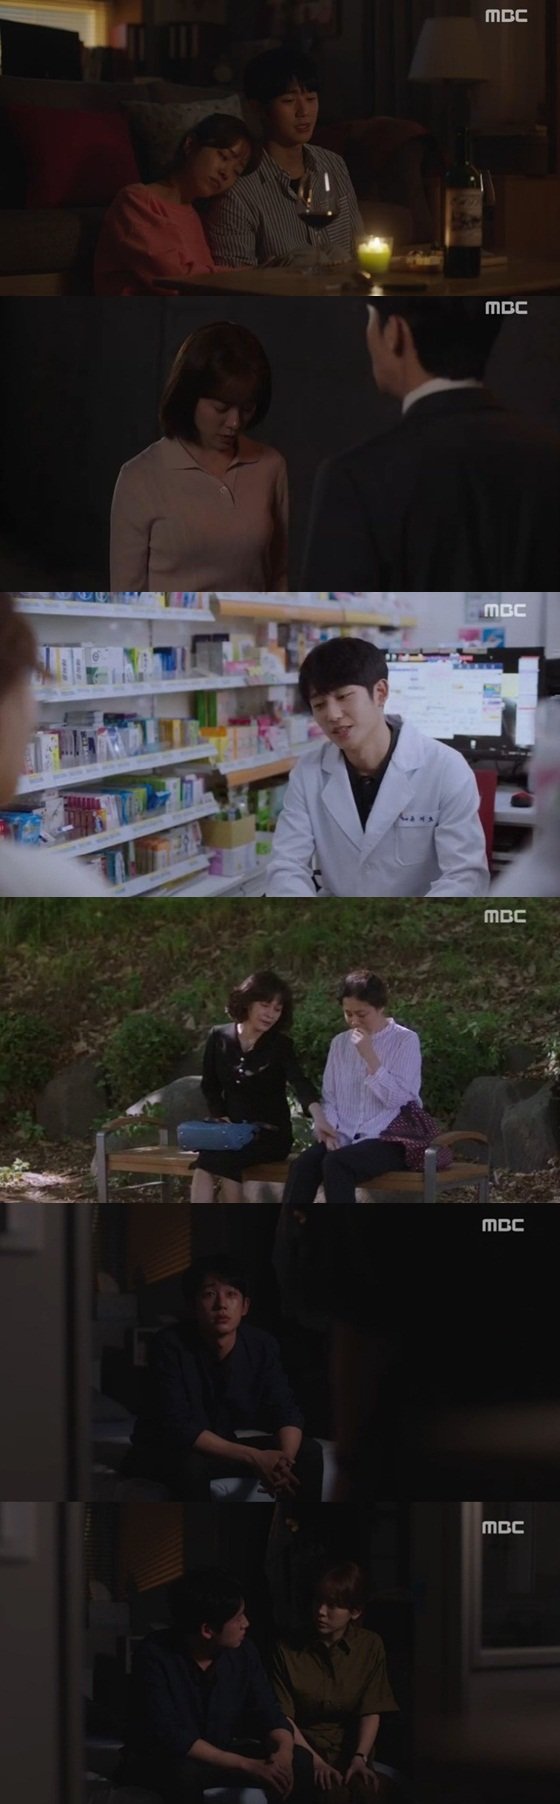 In the MBC drama Spring Night, which aired on the 4th, Song Seung-hwan (Lee Tae-hak), the father of Han Ji-min (Lee Jung-in), was drawn to the fact that he had a son in the movie, and he was strongly opposed.Angrily at the fact that shes single.Han Ji-min did not run away, but headed for Song Seung-hwan: He has a child, but he will marry. I know you want him to insult and fall.I am really sorry, but my heart is not at will. It was Jeong Hae-in who comforted Han Ji-min, who was hit by the wall of opposition from his family, saying, I like courage and braveness, but I look forward to my mind as well as my body.Kim Jun-han (Kwon Gi-seok)s obsession in their strong love was unstoppable: If I didnt have a background, would you have met me? Youre not Yoo Ji-Ho.I think it will be satisfactory, said Song Seung-hwan, who proposed a job after leaving school and the peace of his family.I realized what I really wanted.Jeong Hae-ins mother Kim Jung-young (Ko Sook-hee) met with Han Ji-mins mother Gil Hae-yeon (Shin Hyung-sun), who came to the pharmacy by chance.The two shared their hearts with a warm comforting hand and recognized the relationship between Han Ji-min and Jung Hae-in.Jung Hae-in, tired of her mothers constant worries for six years after her son Haians mother left, told Seo Jung-yeon (Wang Hye-jung): Its six years.How much longer do I have to live like that? Every time my mother does that, the pain I have forgotten is revived. And then I fell drunk.Han Ji-min witnessed this and asked what happened. Jung Hae-in said, Will Jung-in abandon us?This was the first time that Jung Hae-in, who showed a solid appearance like an adult man, made a deep impression as a god who showed a candid appearance with the past trauma Confessions.When I think of Jung Eun-woo, my heart hurts, the pain and crying, leaving a tingling sound with the feeling of overlapping with my son Haian.